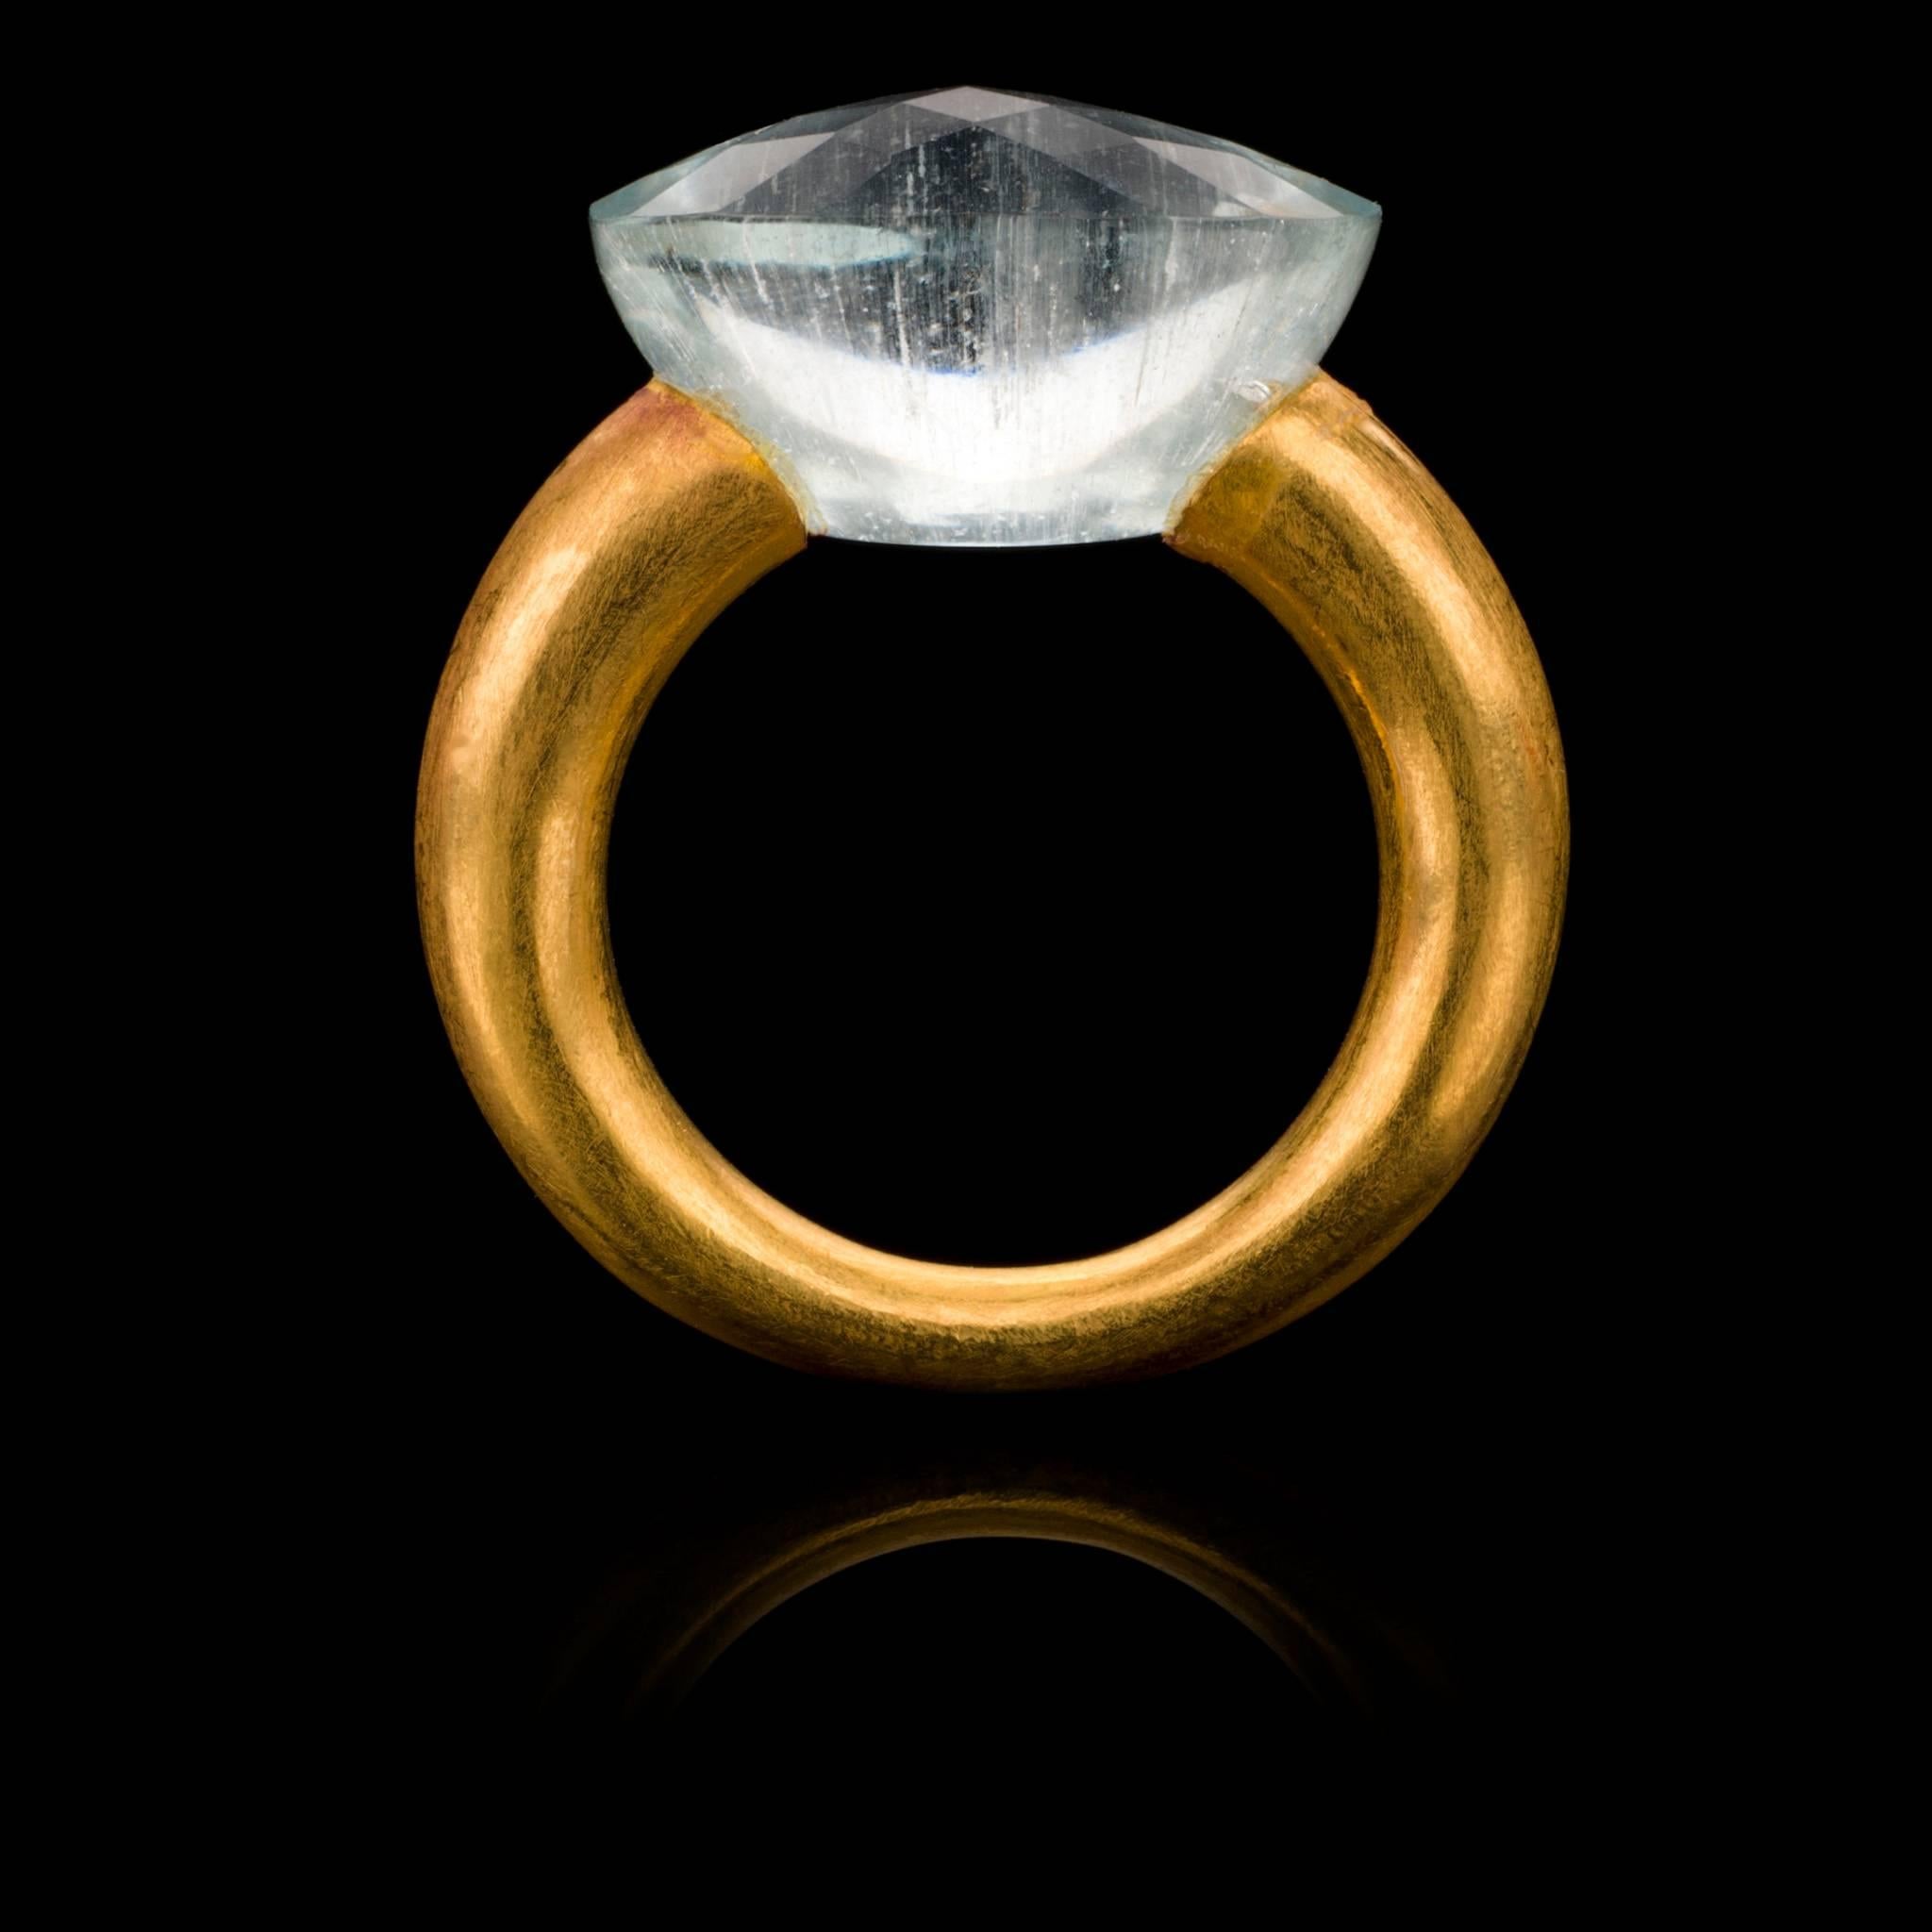 Unique 18 karat brushed gold ring holding a large, square faceted aquamarine. The simplicity of the design puts the stone centre stage and gives it the opportunity to truly dazzle! The ring is hand made using ancient Indian techniques that have been